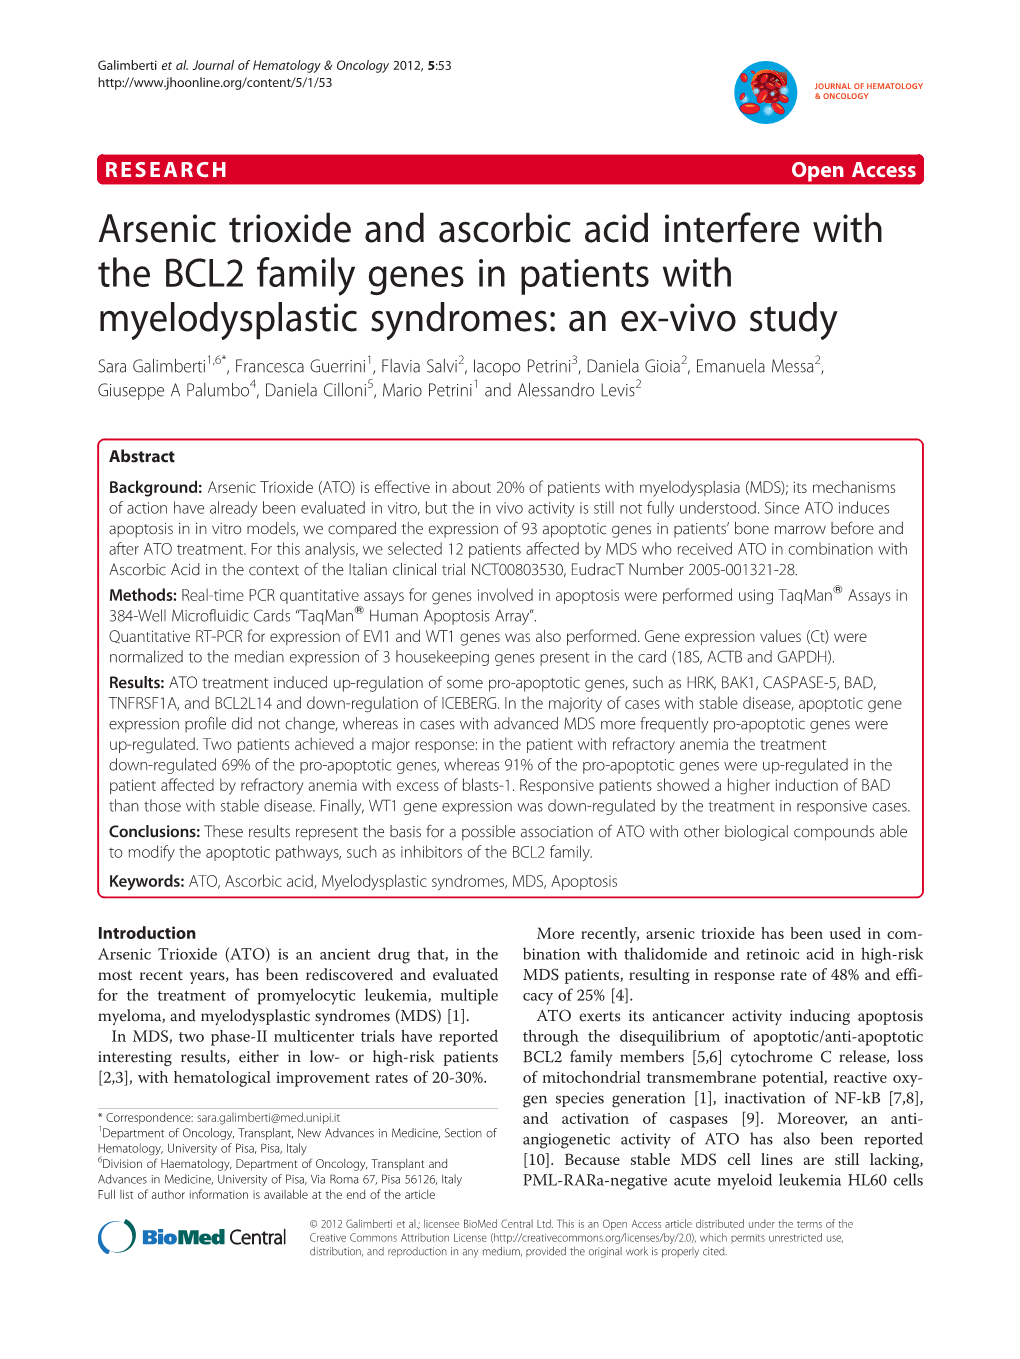 Arsenic Trioxide and Ascorbic Acid Interfere with the BCL2 Family Genes in Patients with Myelodysplastic Syndromes